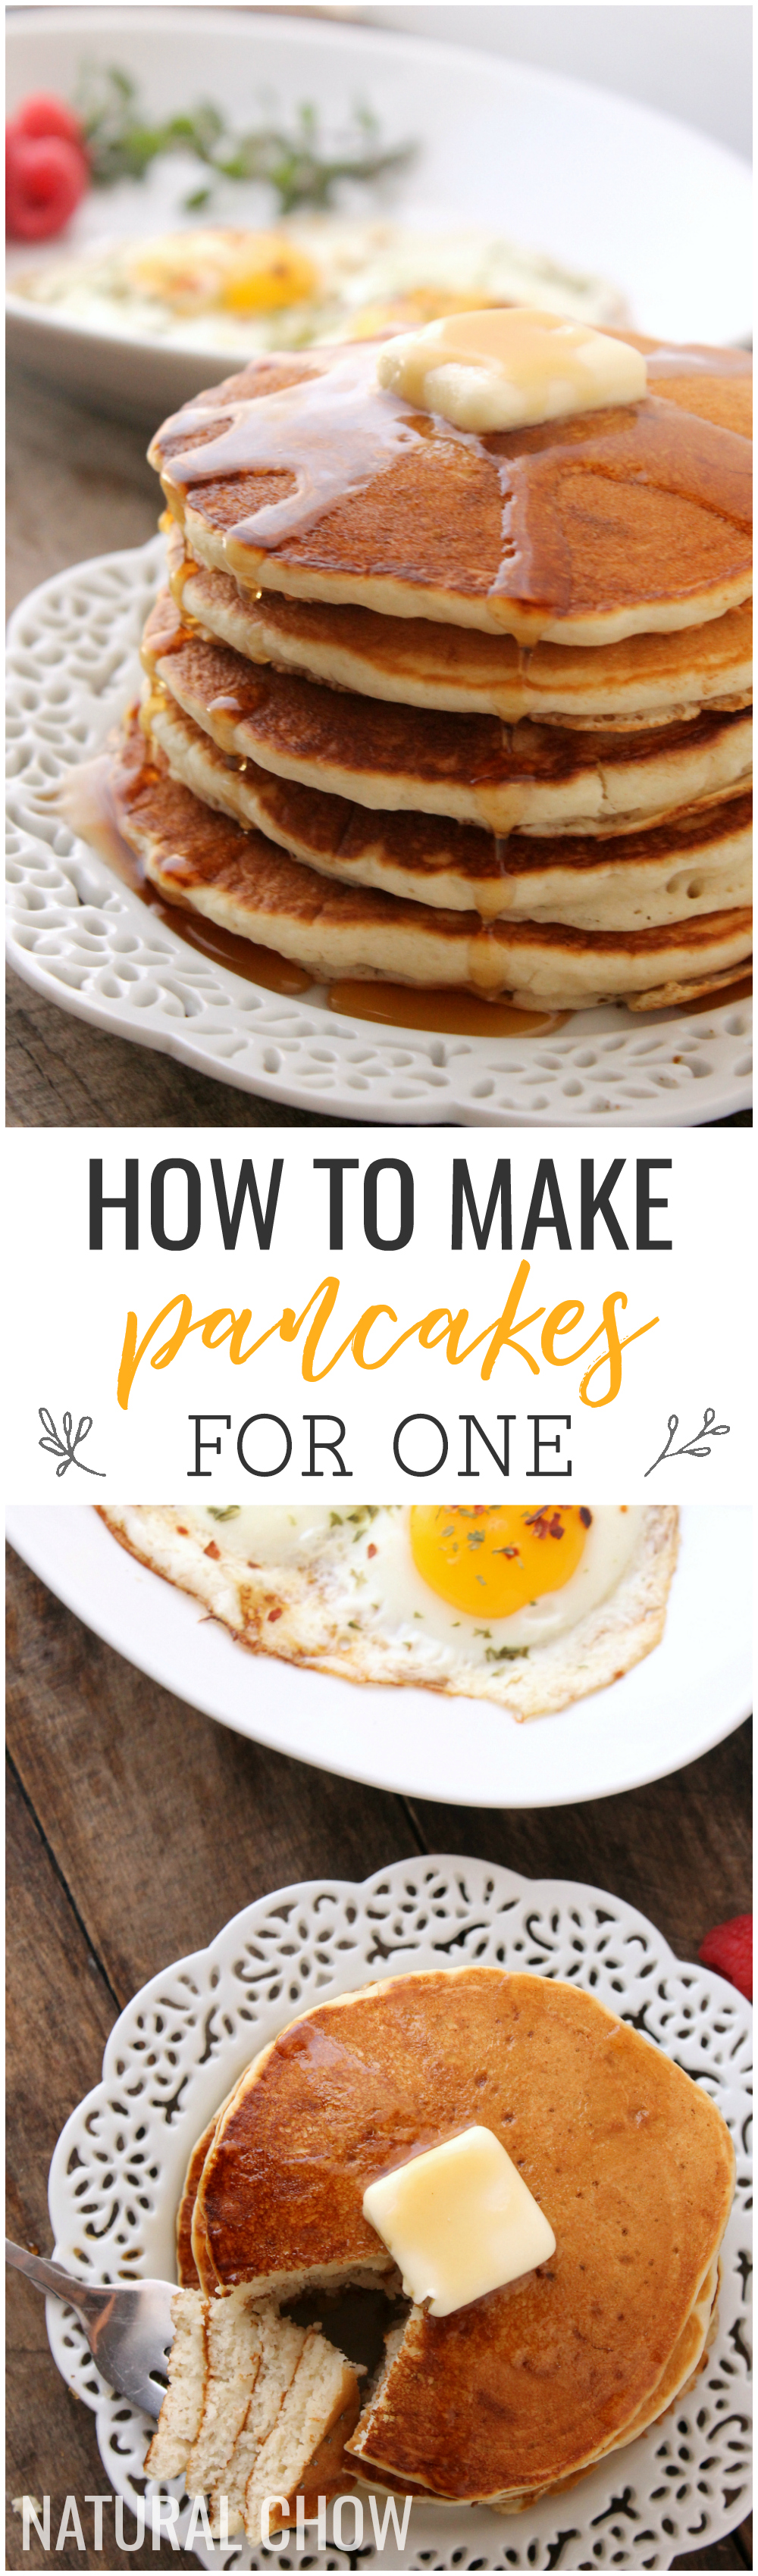 Making pancakes for one is not only incredibly simple, but it's also a great kitchen staple if you live by yourself, just want a small meal, or if don't want to spend forever making a large batch of pancakes. 